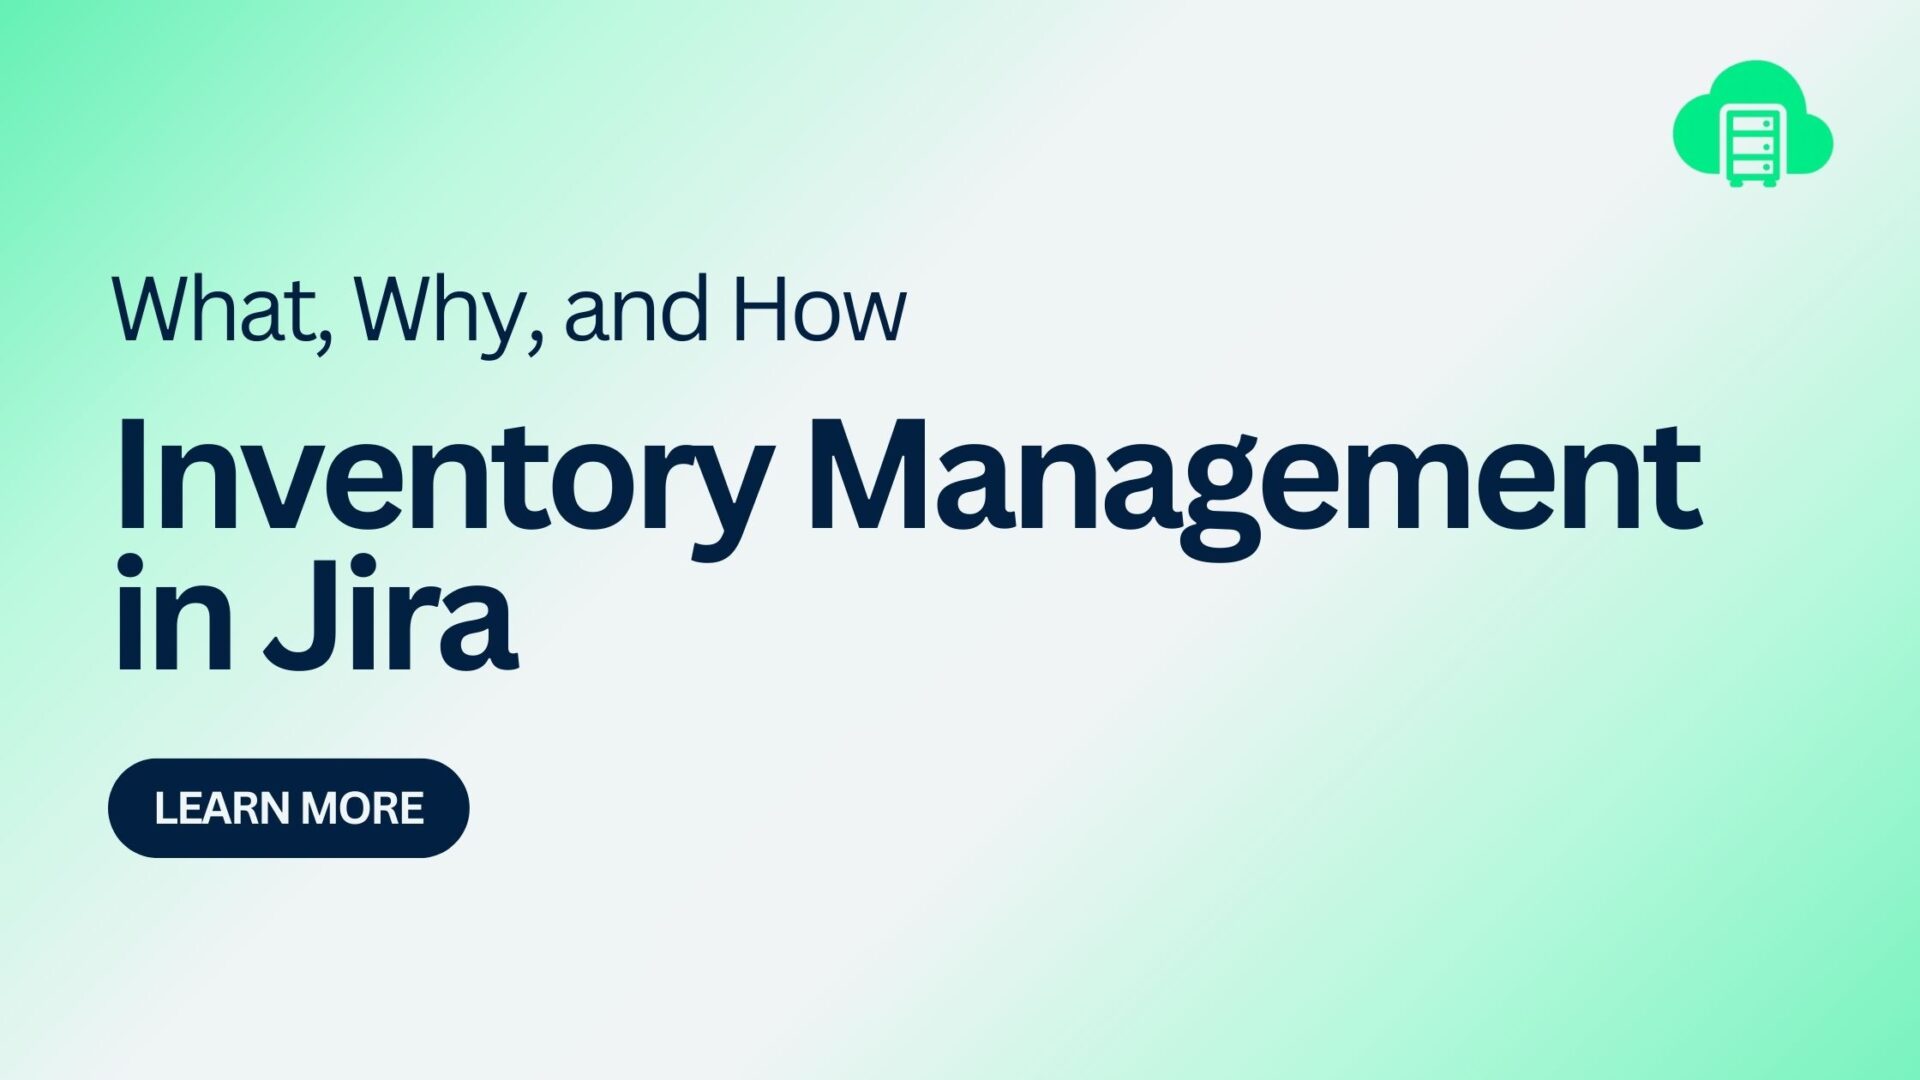 Jira Inventory Management What, Why, and How